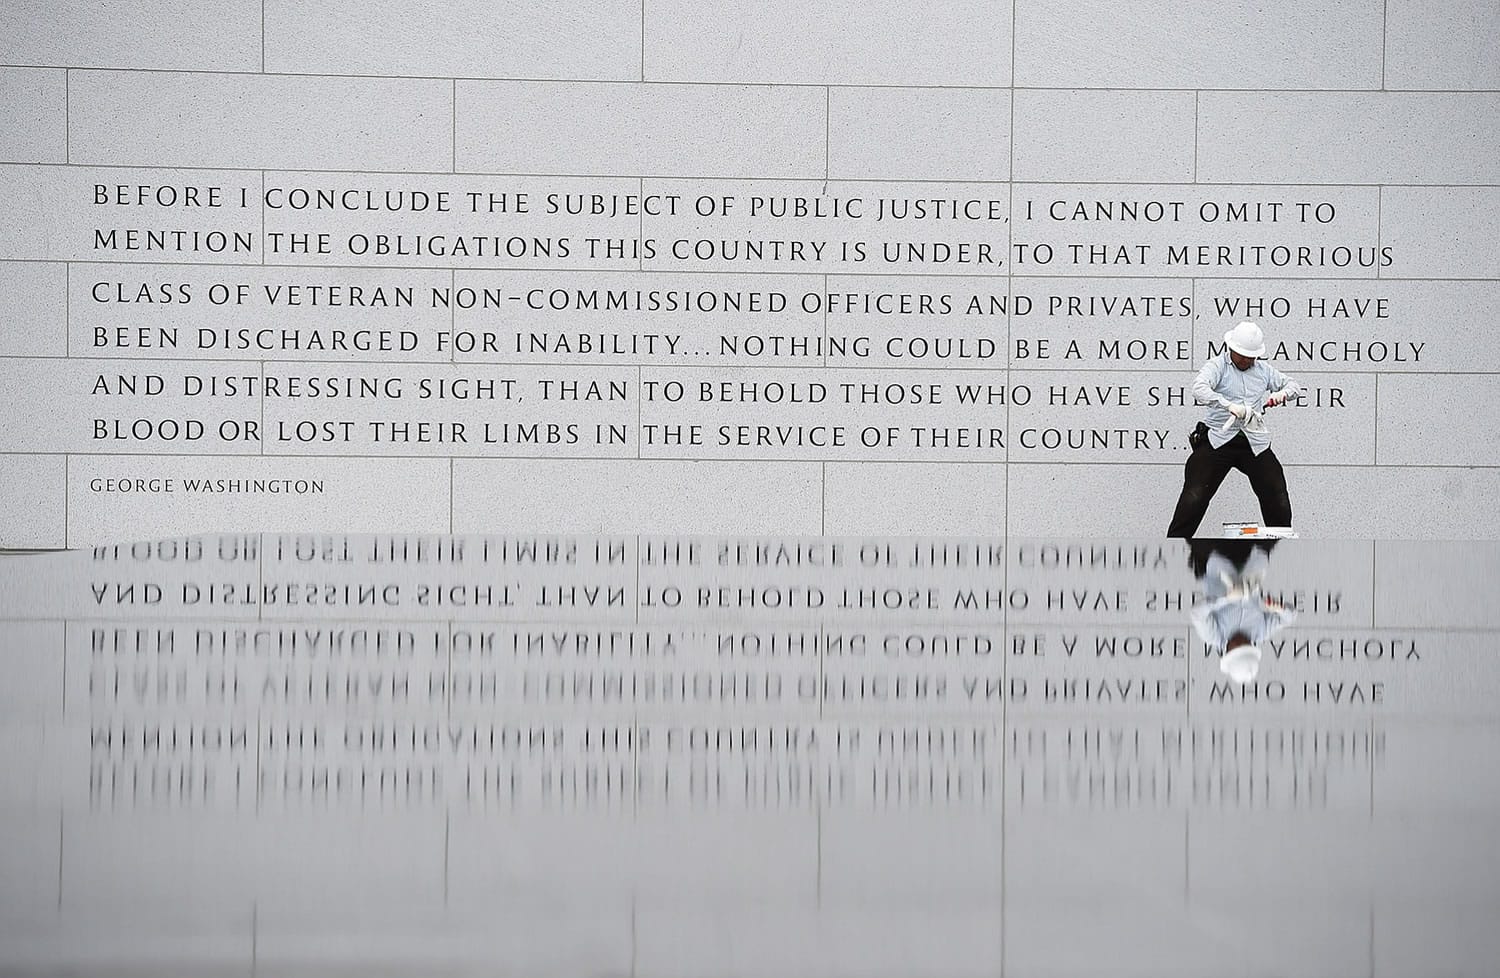 MATT McCLAIN/Associated Press
Lionel Reyes works at the American Veterans Disabled for Life Memorial on Monday in Washington. A ceremony to dedicate the new memorial is scheduled for Sunday.